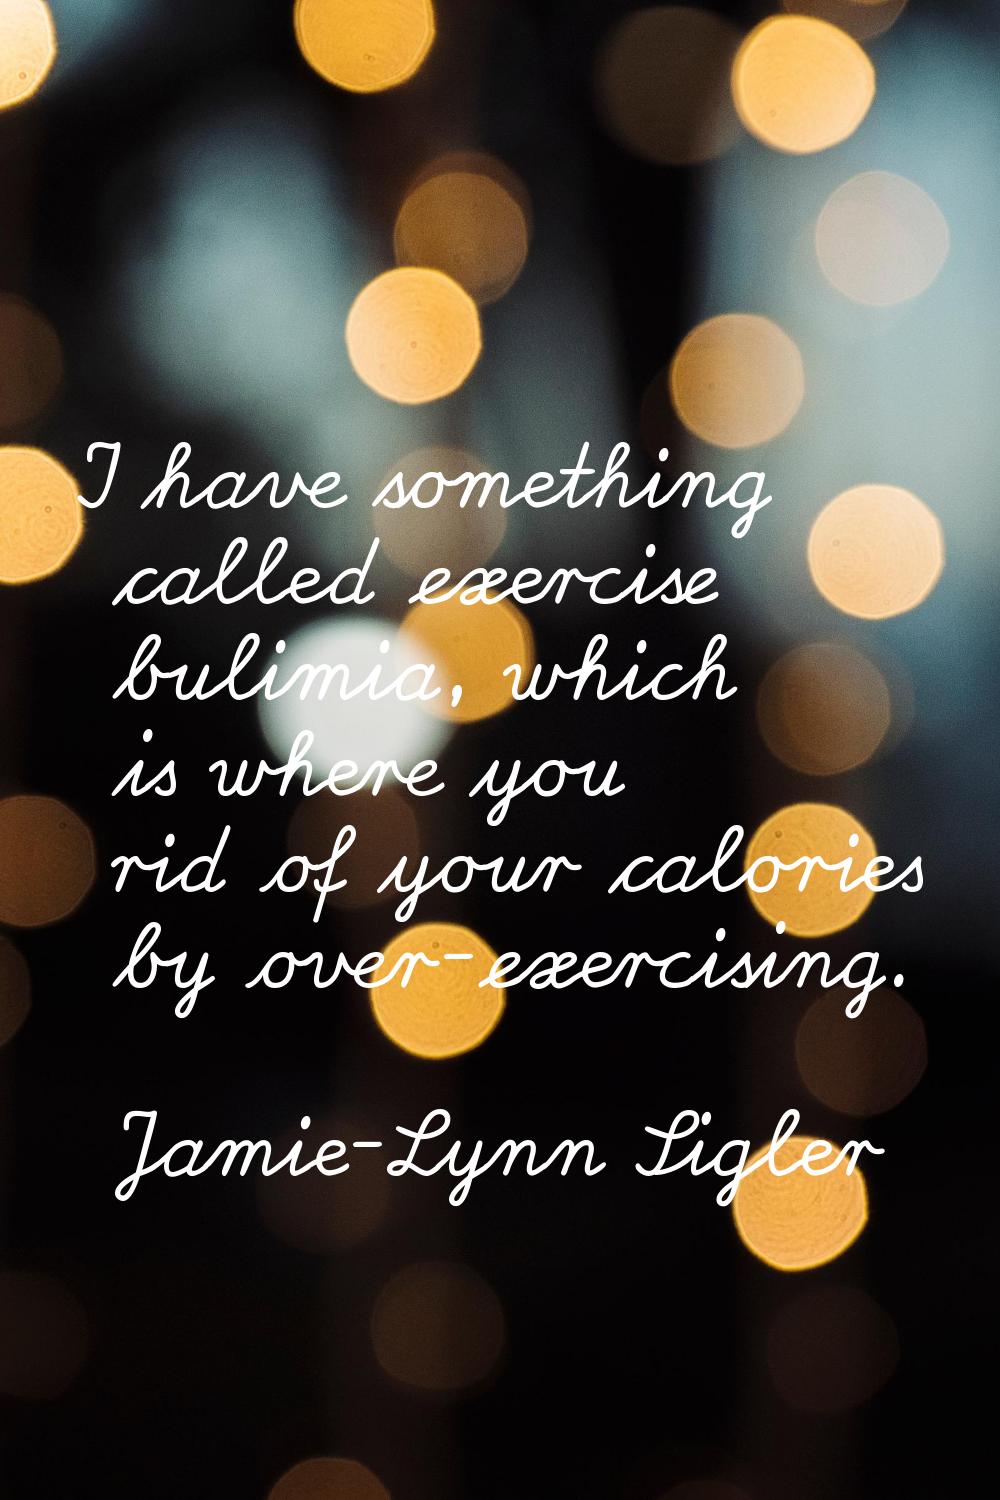 I have something called exercise bulimia, which is where you rid of your calories by over-exercisin